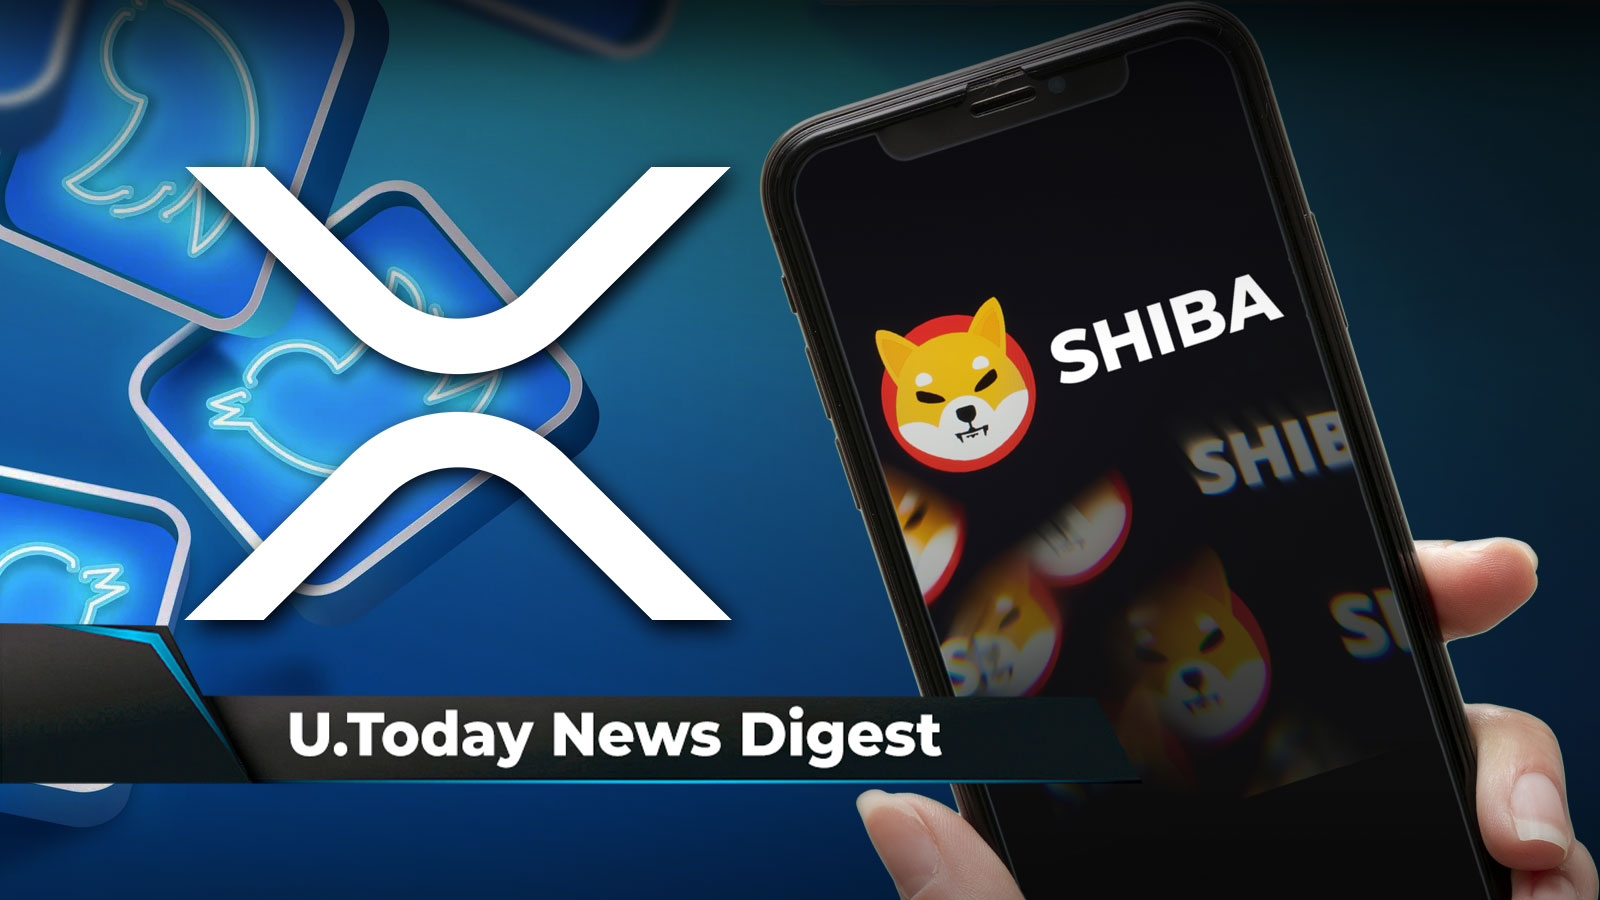 Ripple Ally Loses Against SEC, Hundreds of Billions of SHIB Wired, XRP Could Beat BTC and DOGE on Twitter: Crypto News Digest by U.Today